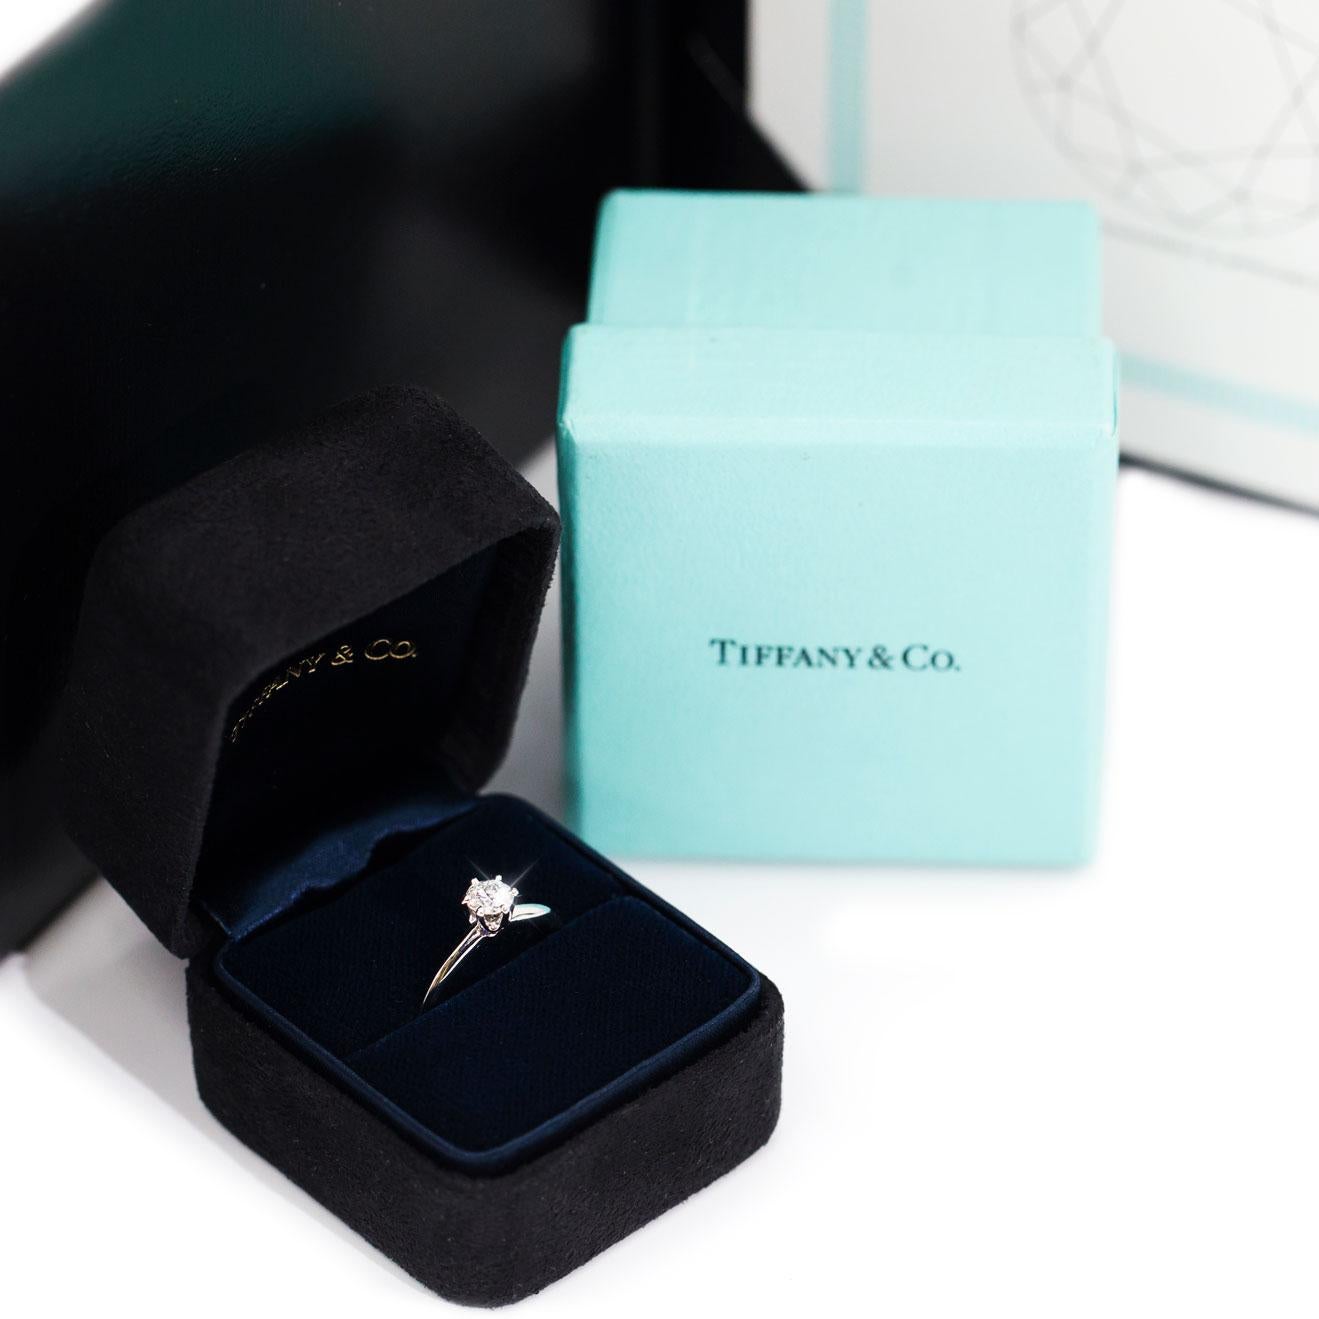 Tiffany & Co Platinum Solitaire Round Diamond Engagement Ring with Box and Cert 12